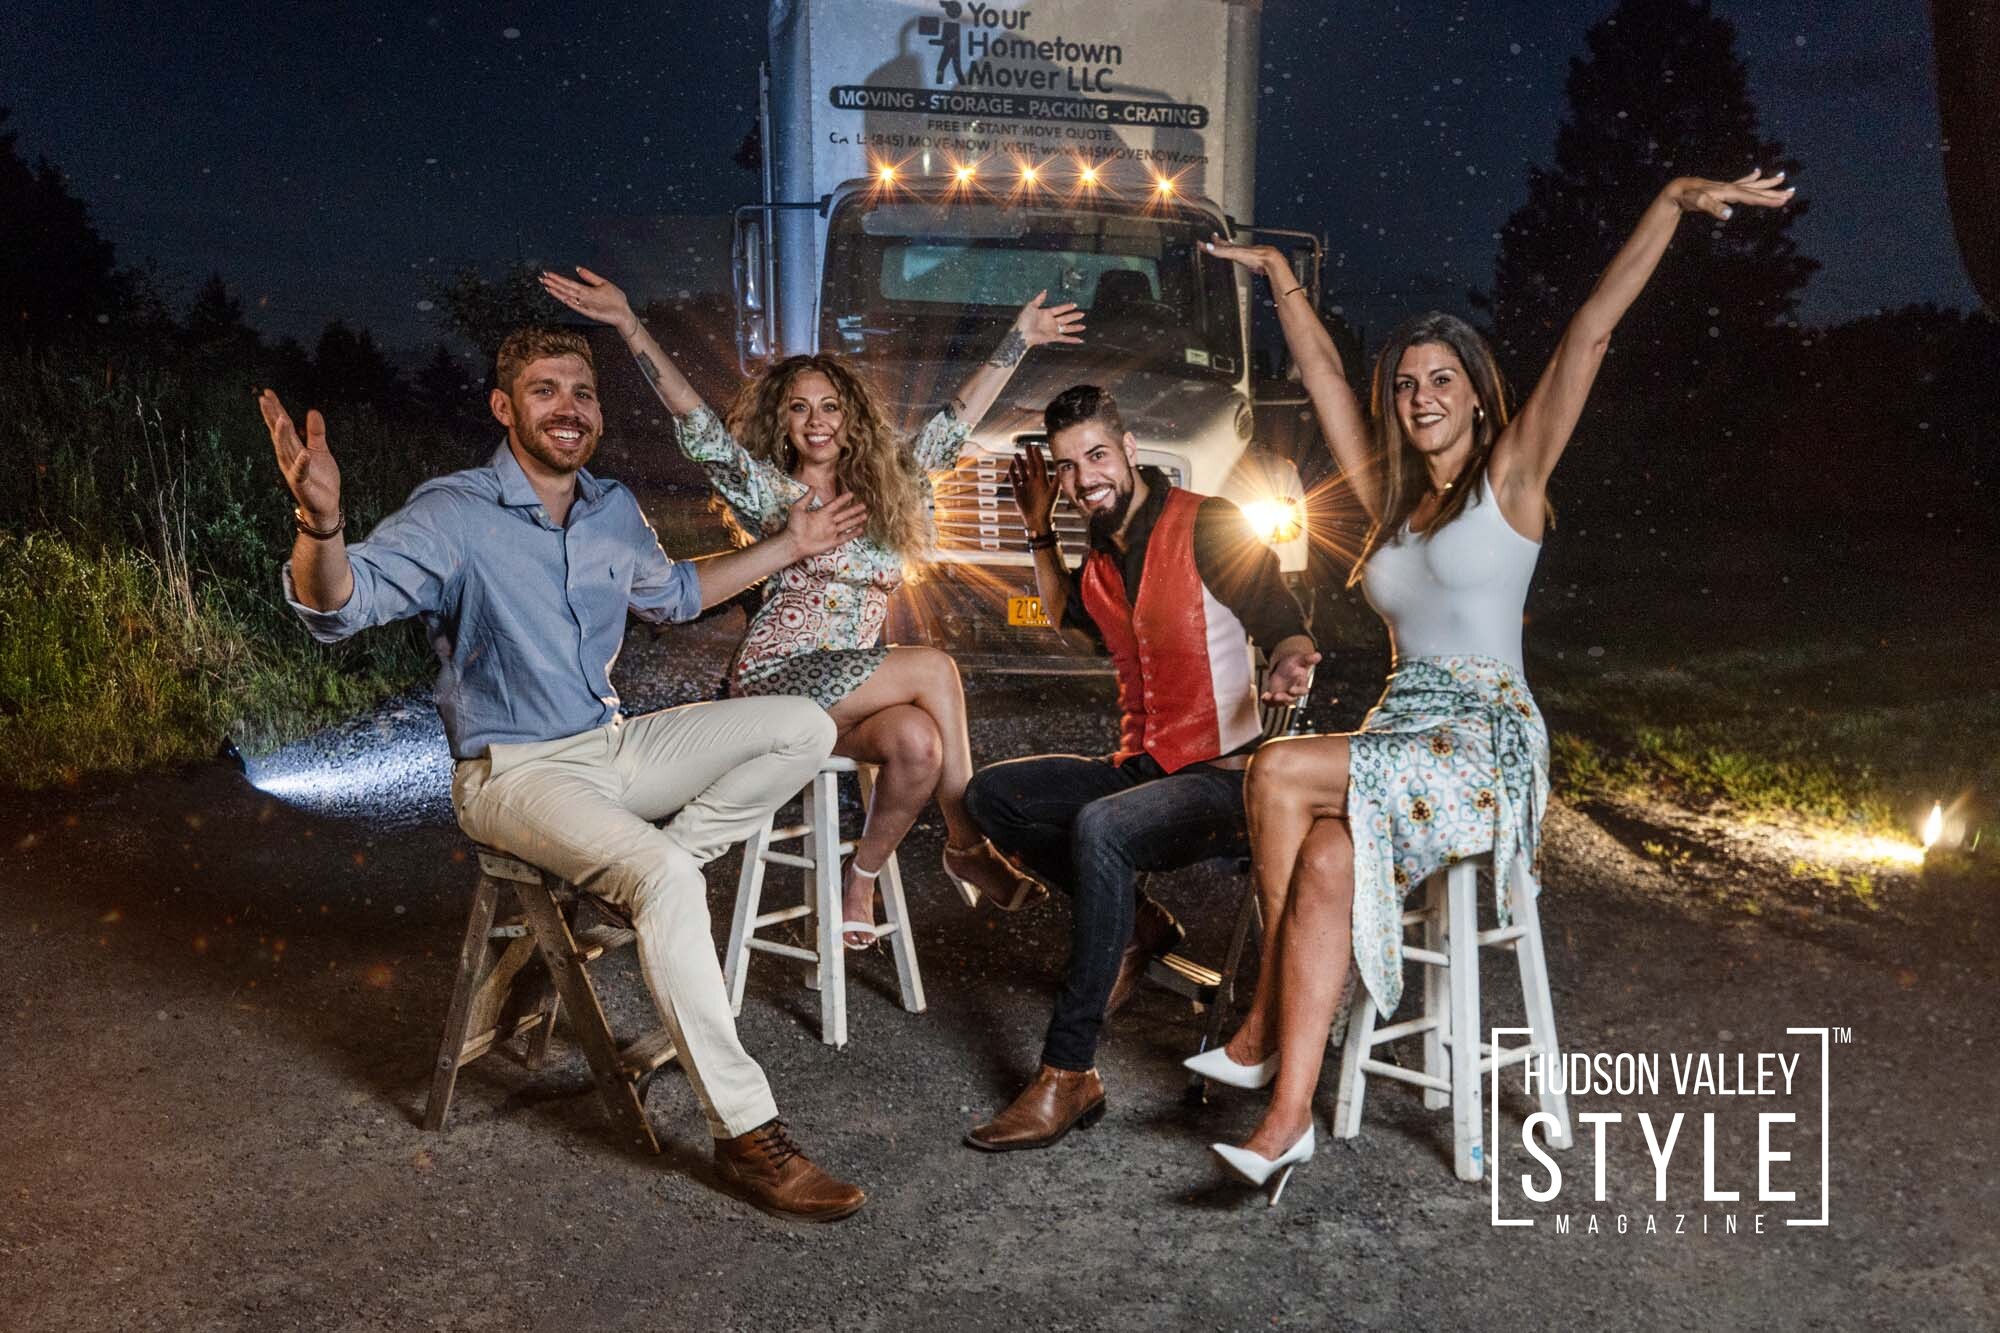 Hometown Mover Moving Company – The New Generation of Moving Services Created in Hudson Valley – Interview by Dino Alexander – Photography by Maxwell Alexander / Duncan Avenue Studios